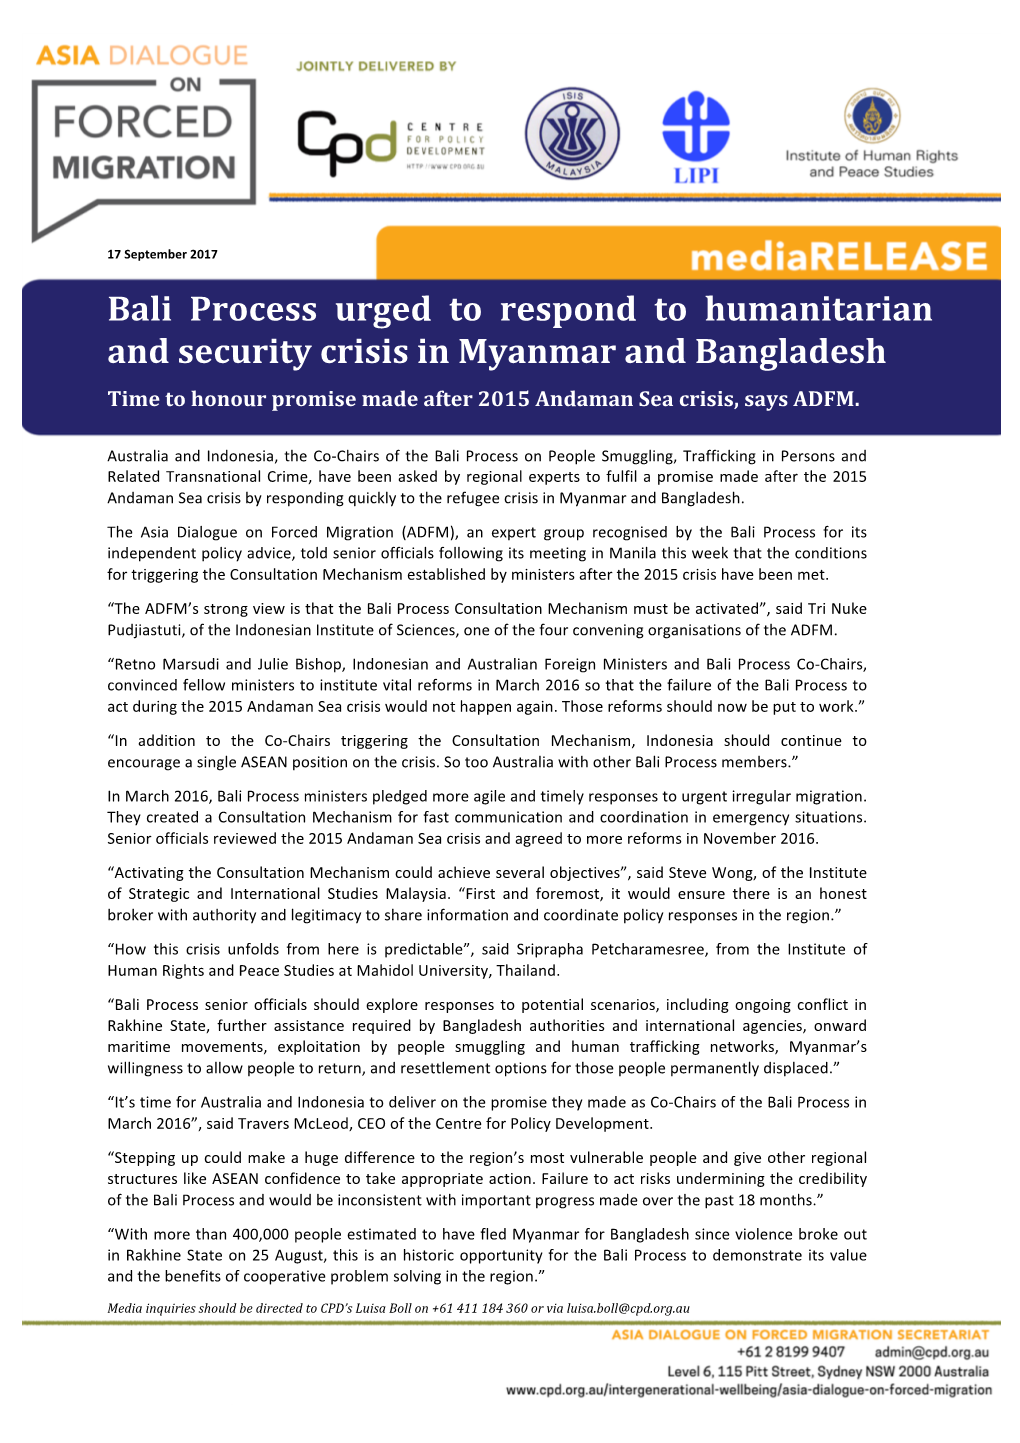 Bali Process Urged to Respond to Humanitarian and Security Crisis in Myanmar and Bangladesh